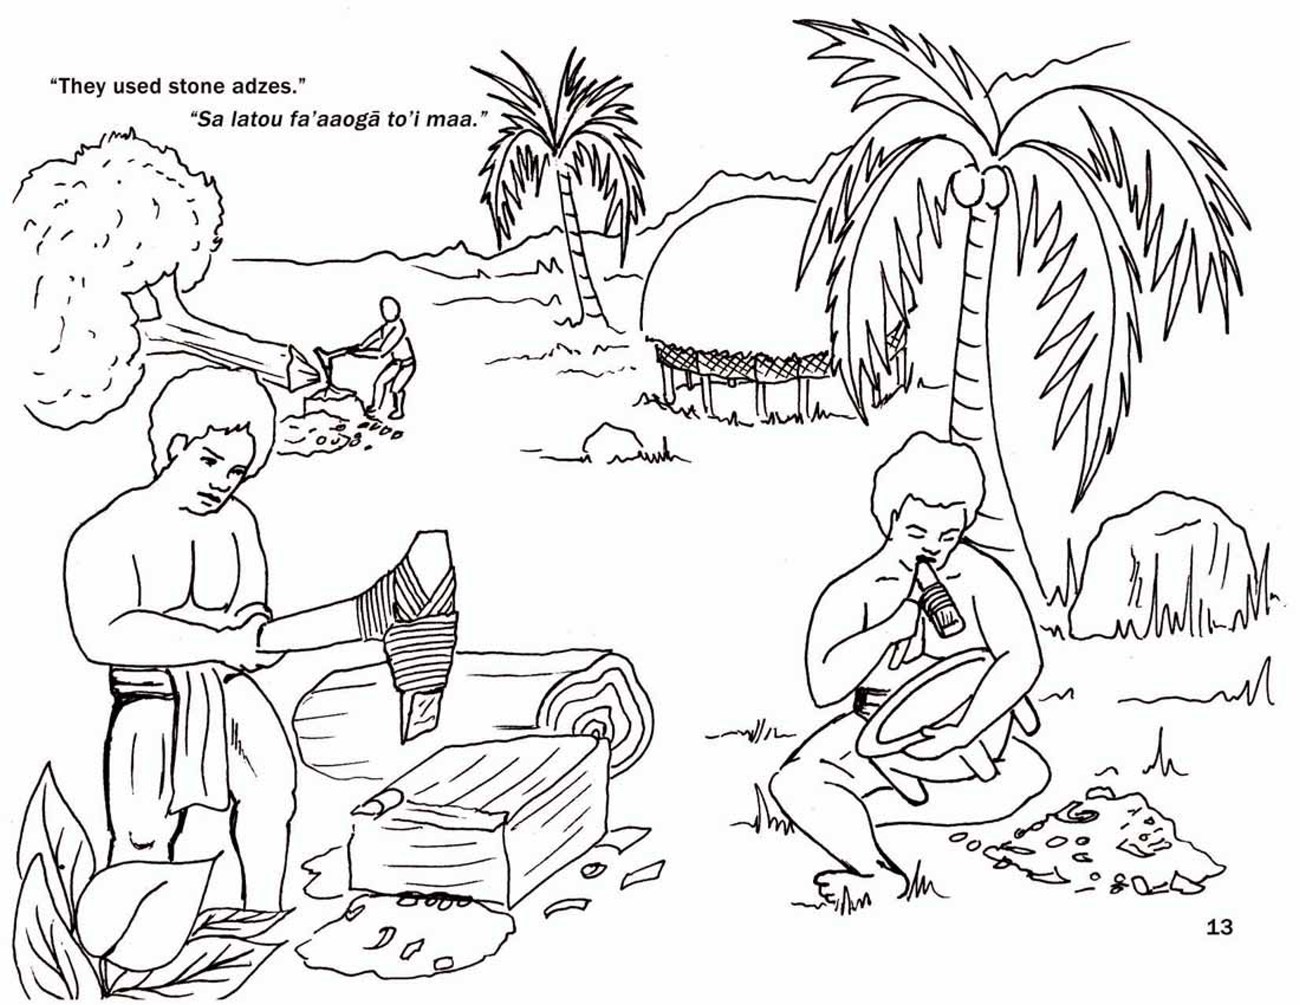 Three people using adzes – cutting down a tree, shaping a log, and making a bowl.